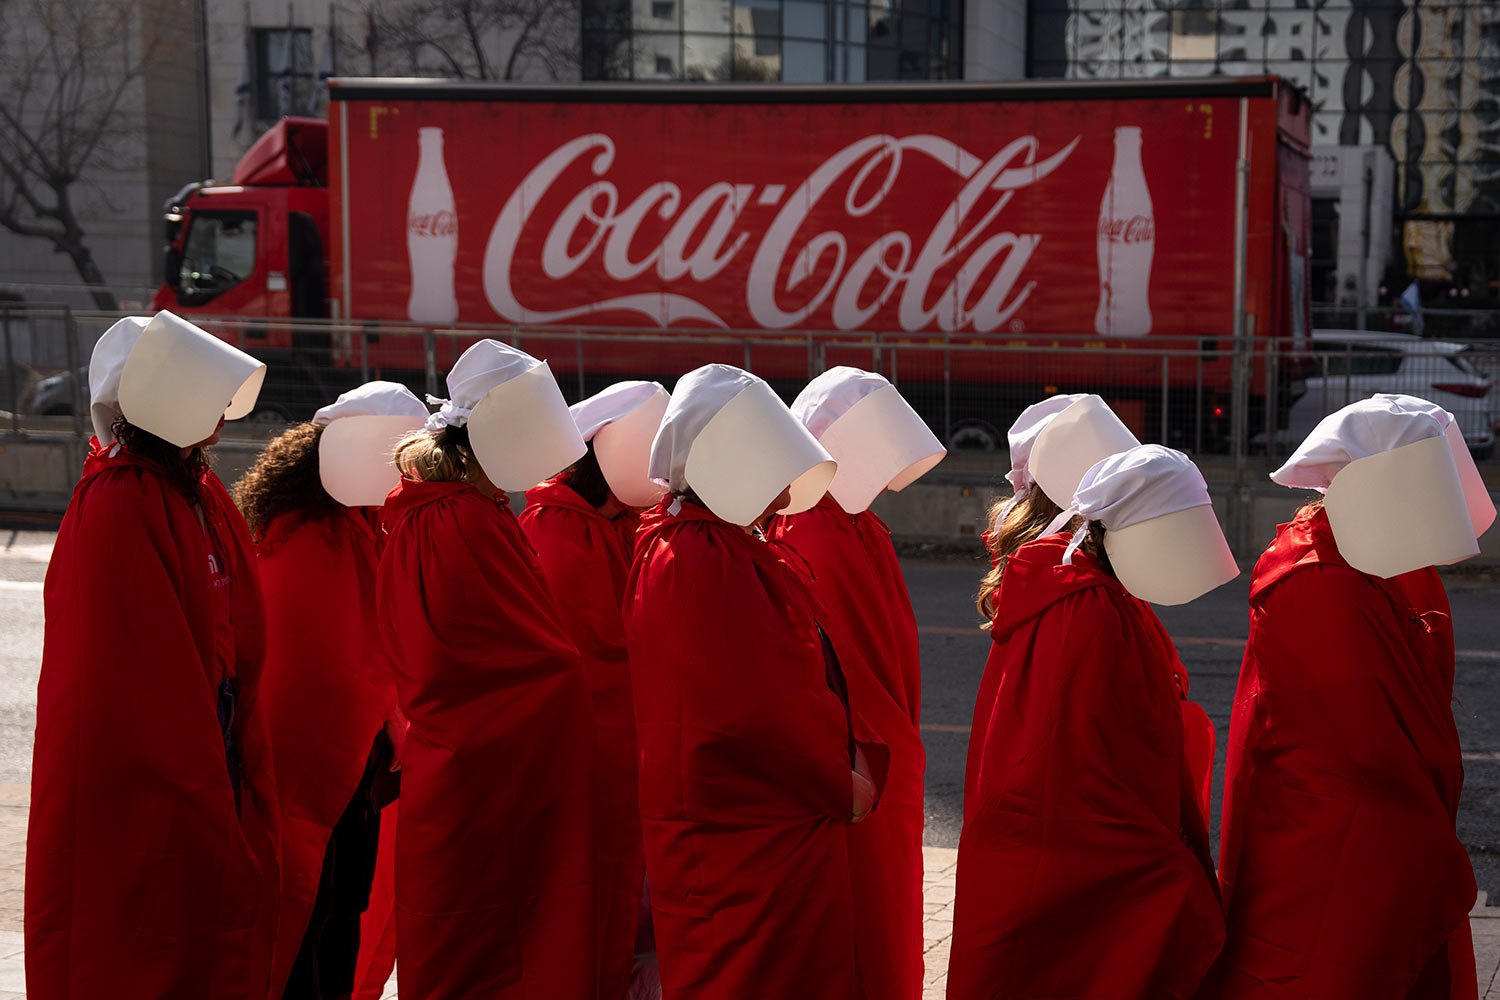  Protesters supporting women's rights dressed as characters from The Handmaid's Tale TV series attend a protest against plans by Prime Minister Benjamin Netanyahu's new government to overhaul the judicial system in Tel Aviv, Israel, Monday, Feb. 20, 